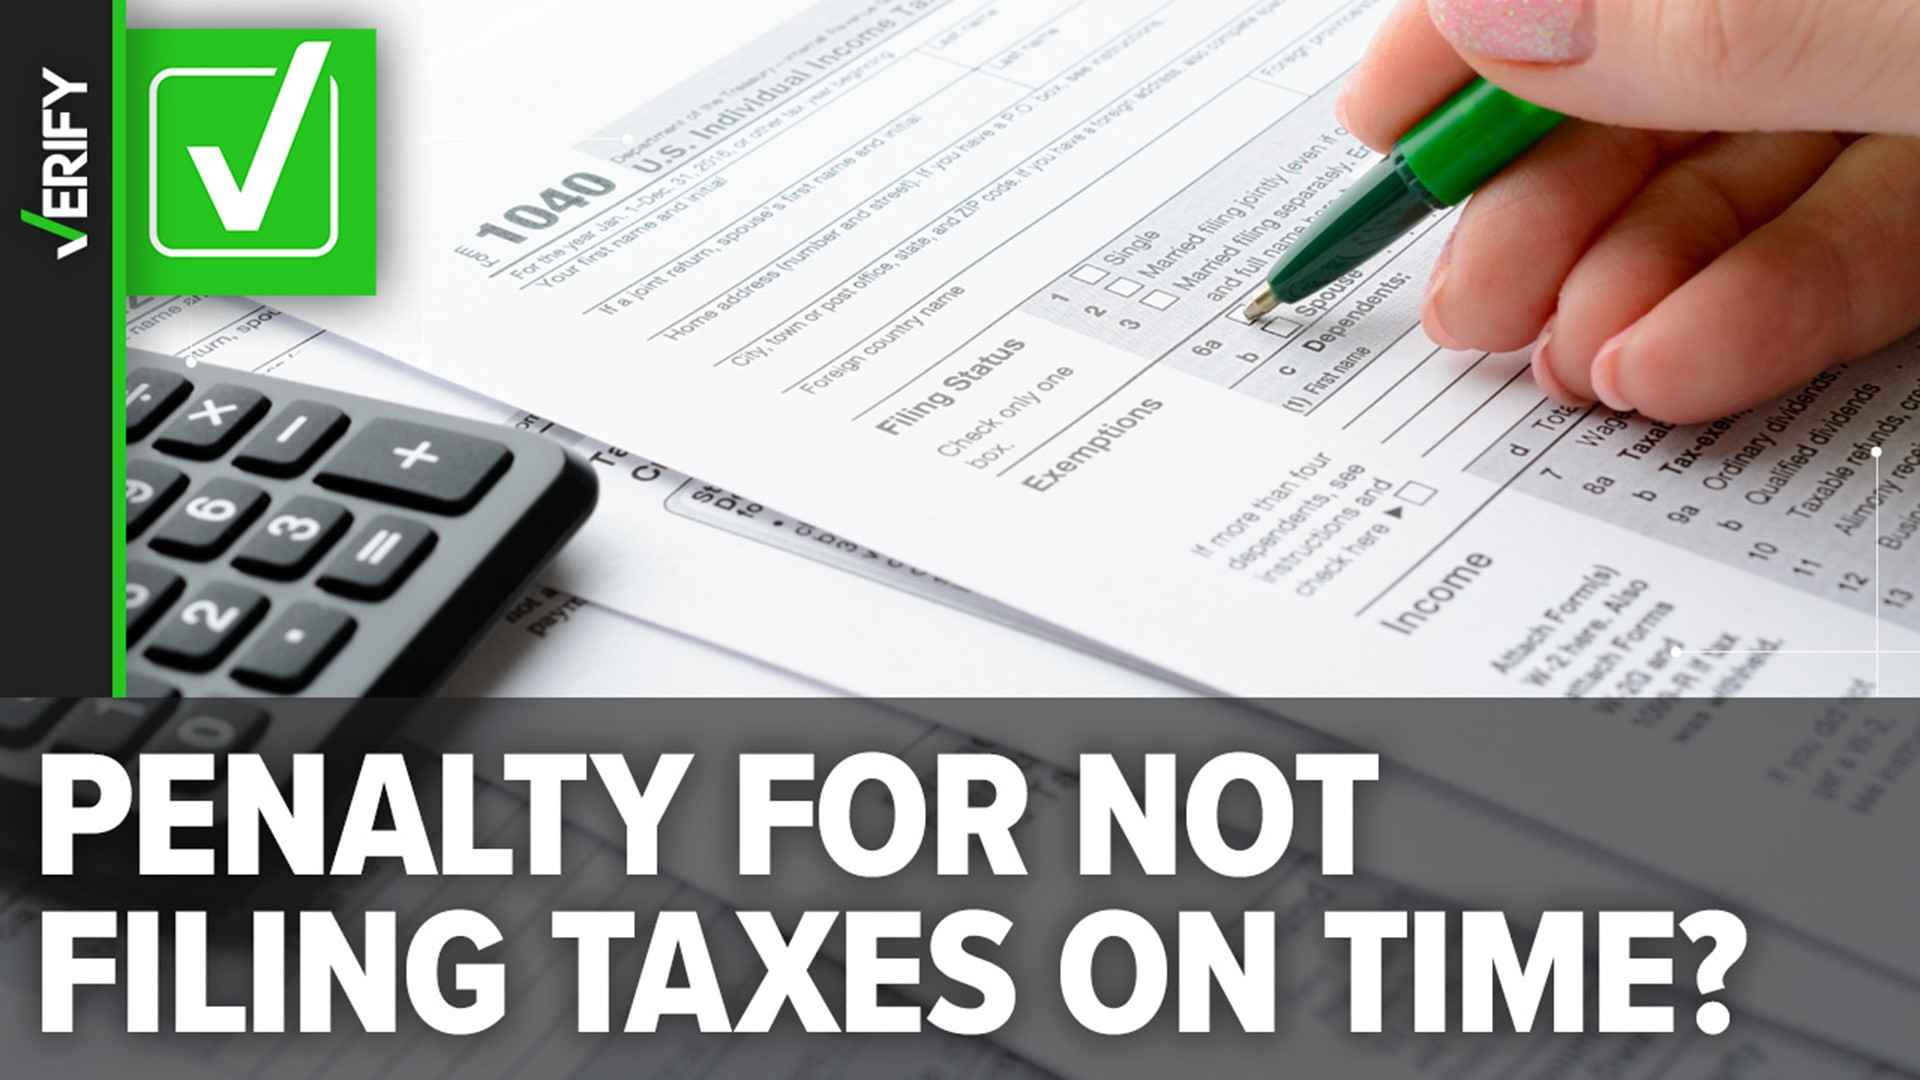 The IRS penalizes taxpayers for both filing late and paying late. We VERIFY how you can avoid or reduce late penalties and interest.